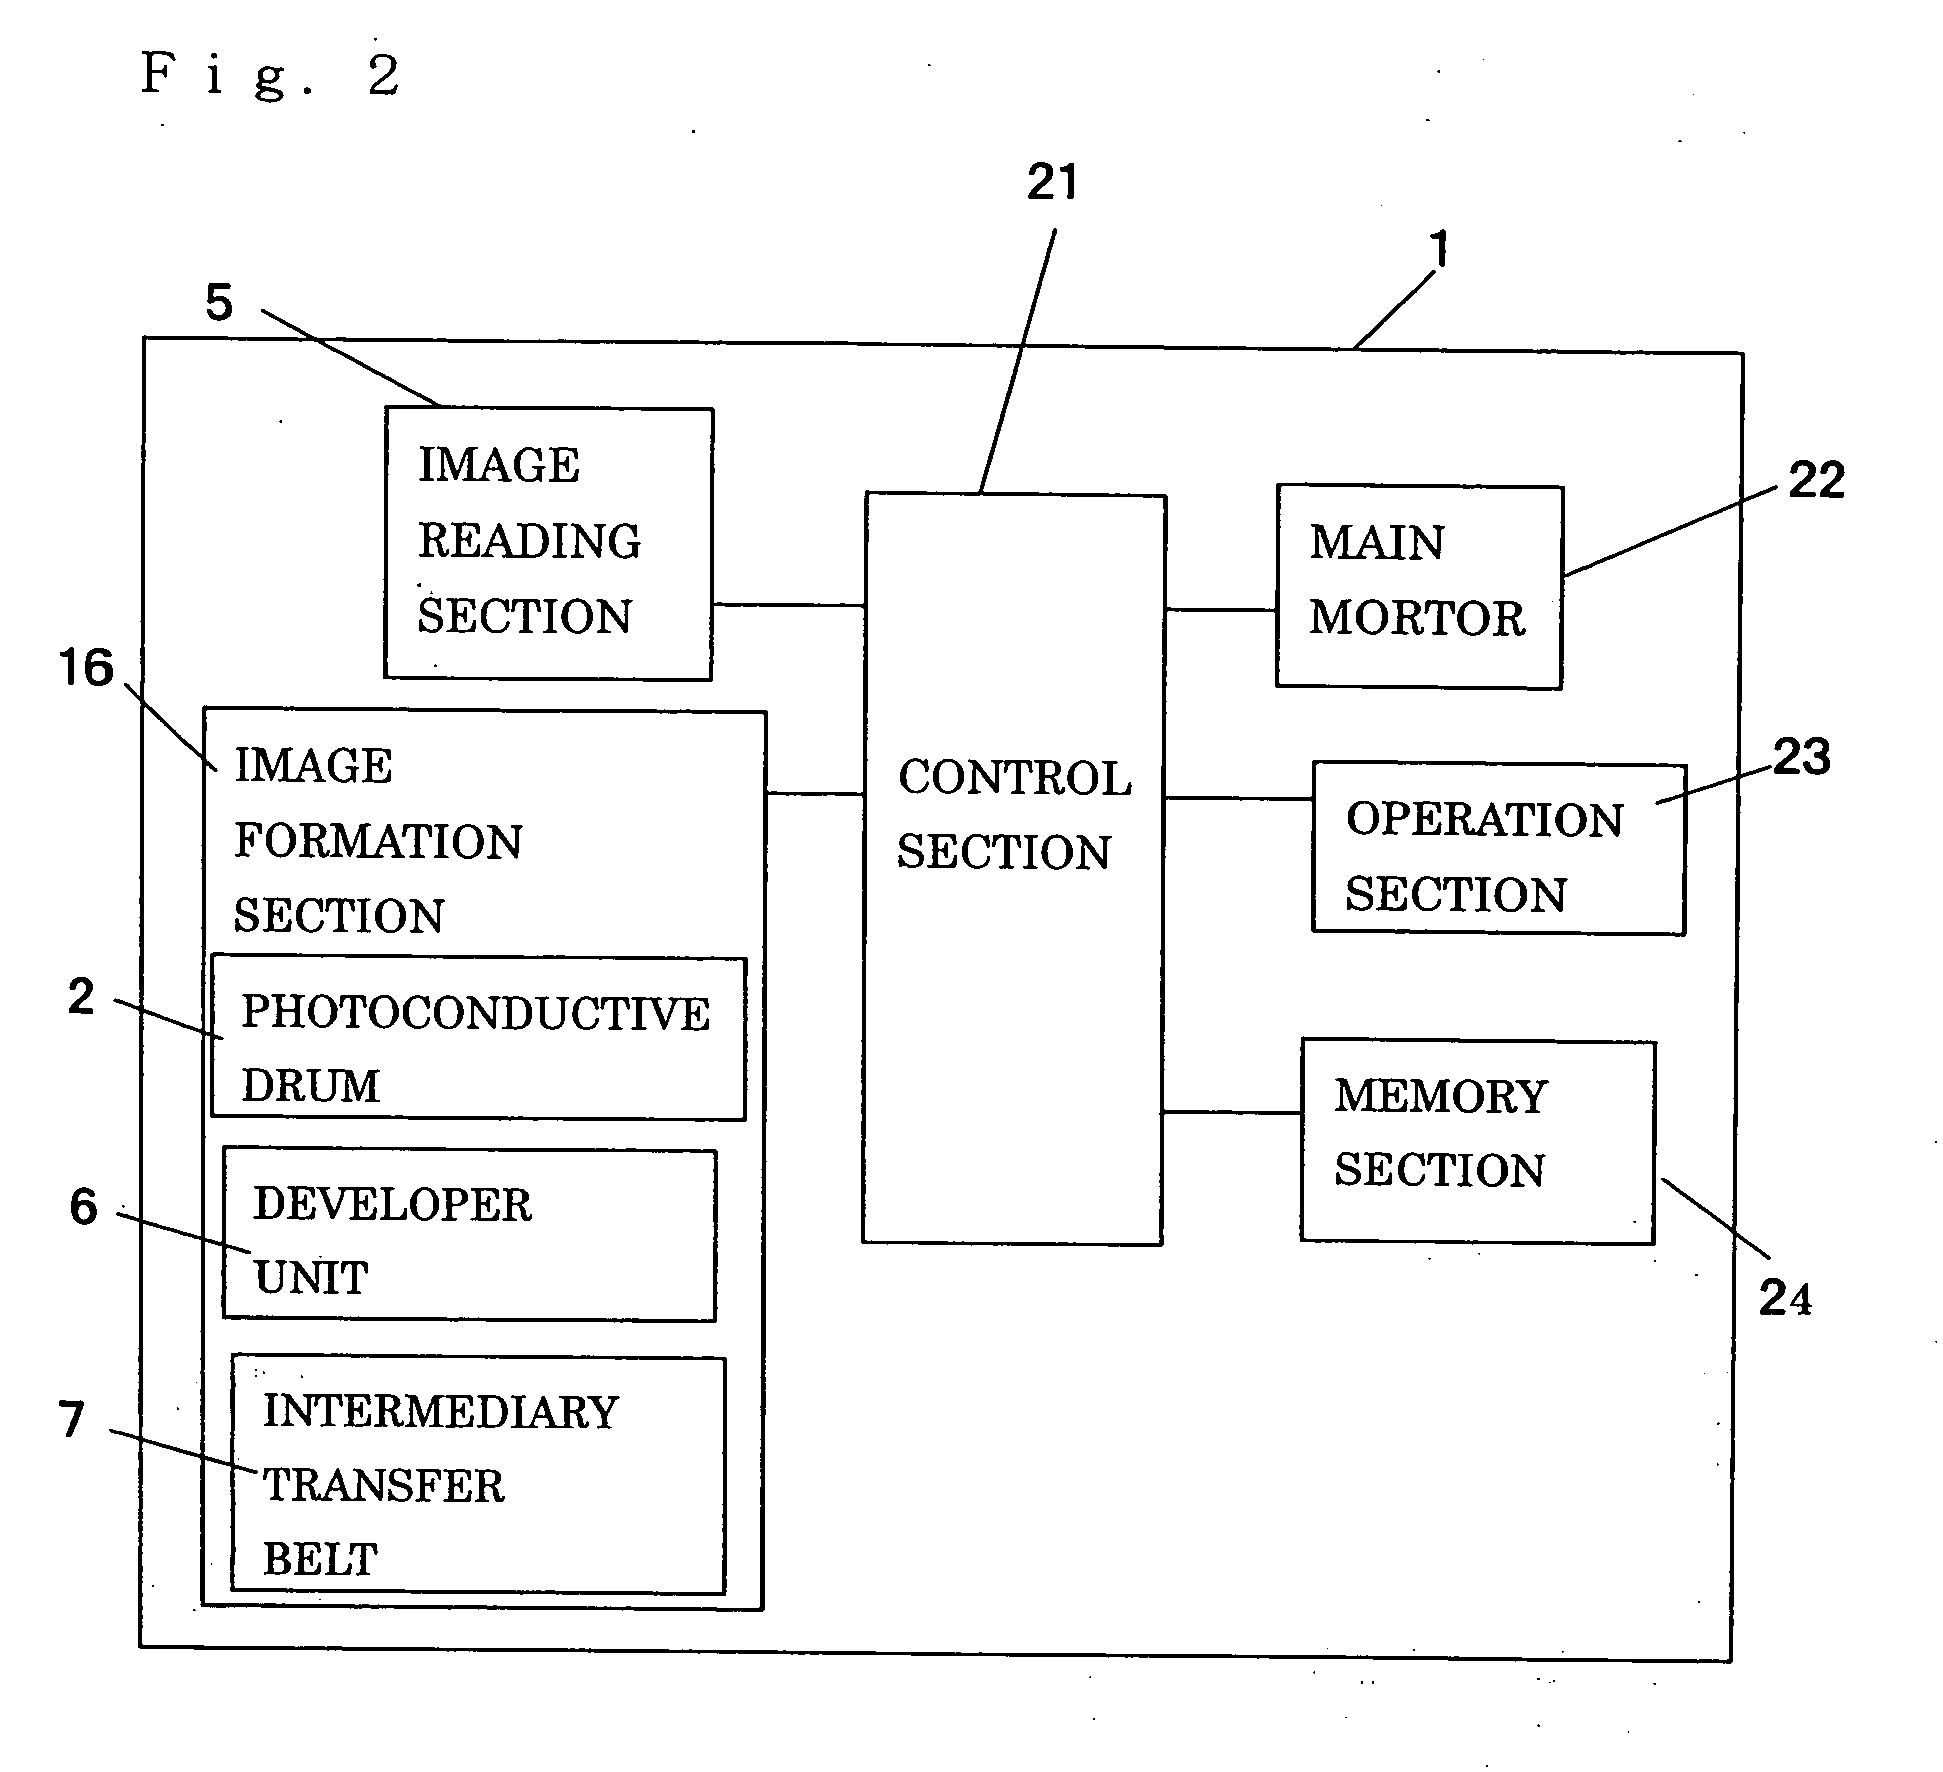 Full-color image forming apparatus